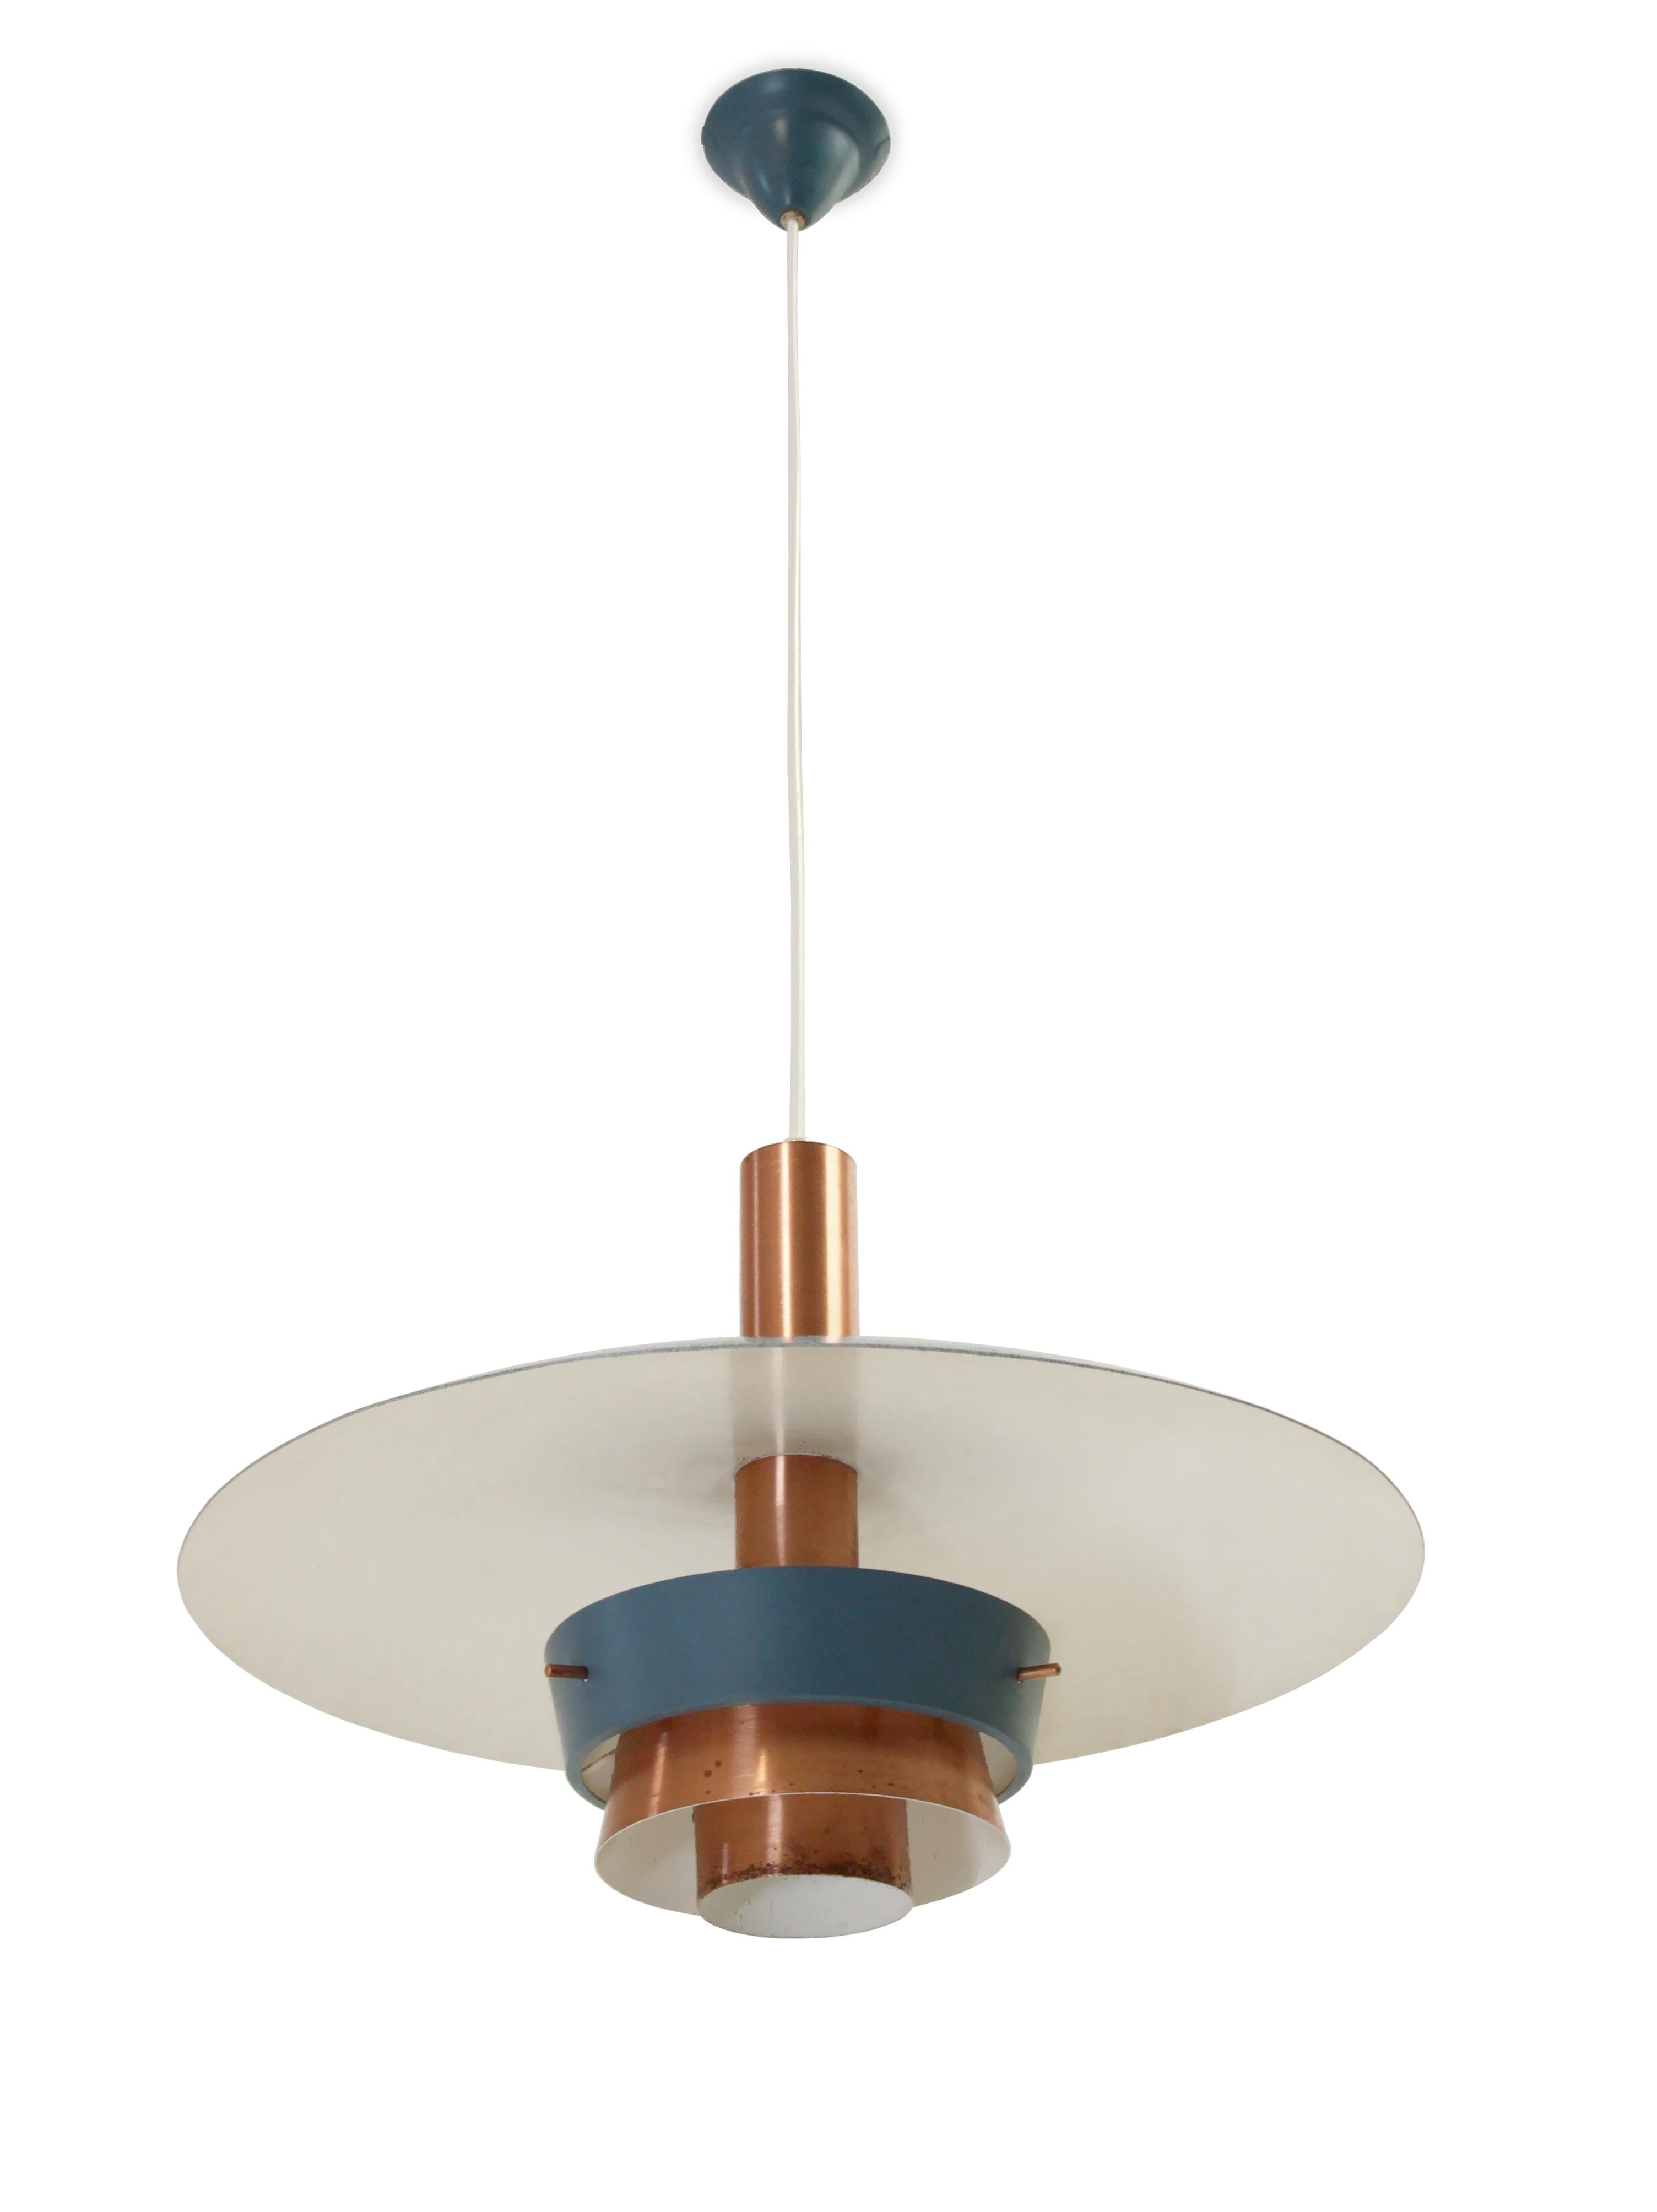 Decorative and sculptural ceiling lamp in copper and painted aluminum. Designed and made in Norway by T. Røste & Company from circa 1960s first half. The lamp is fully working and in very good vintage condition.